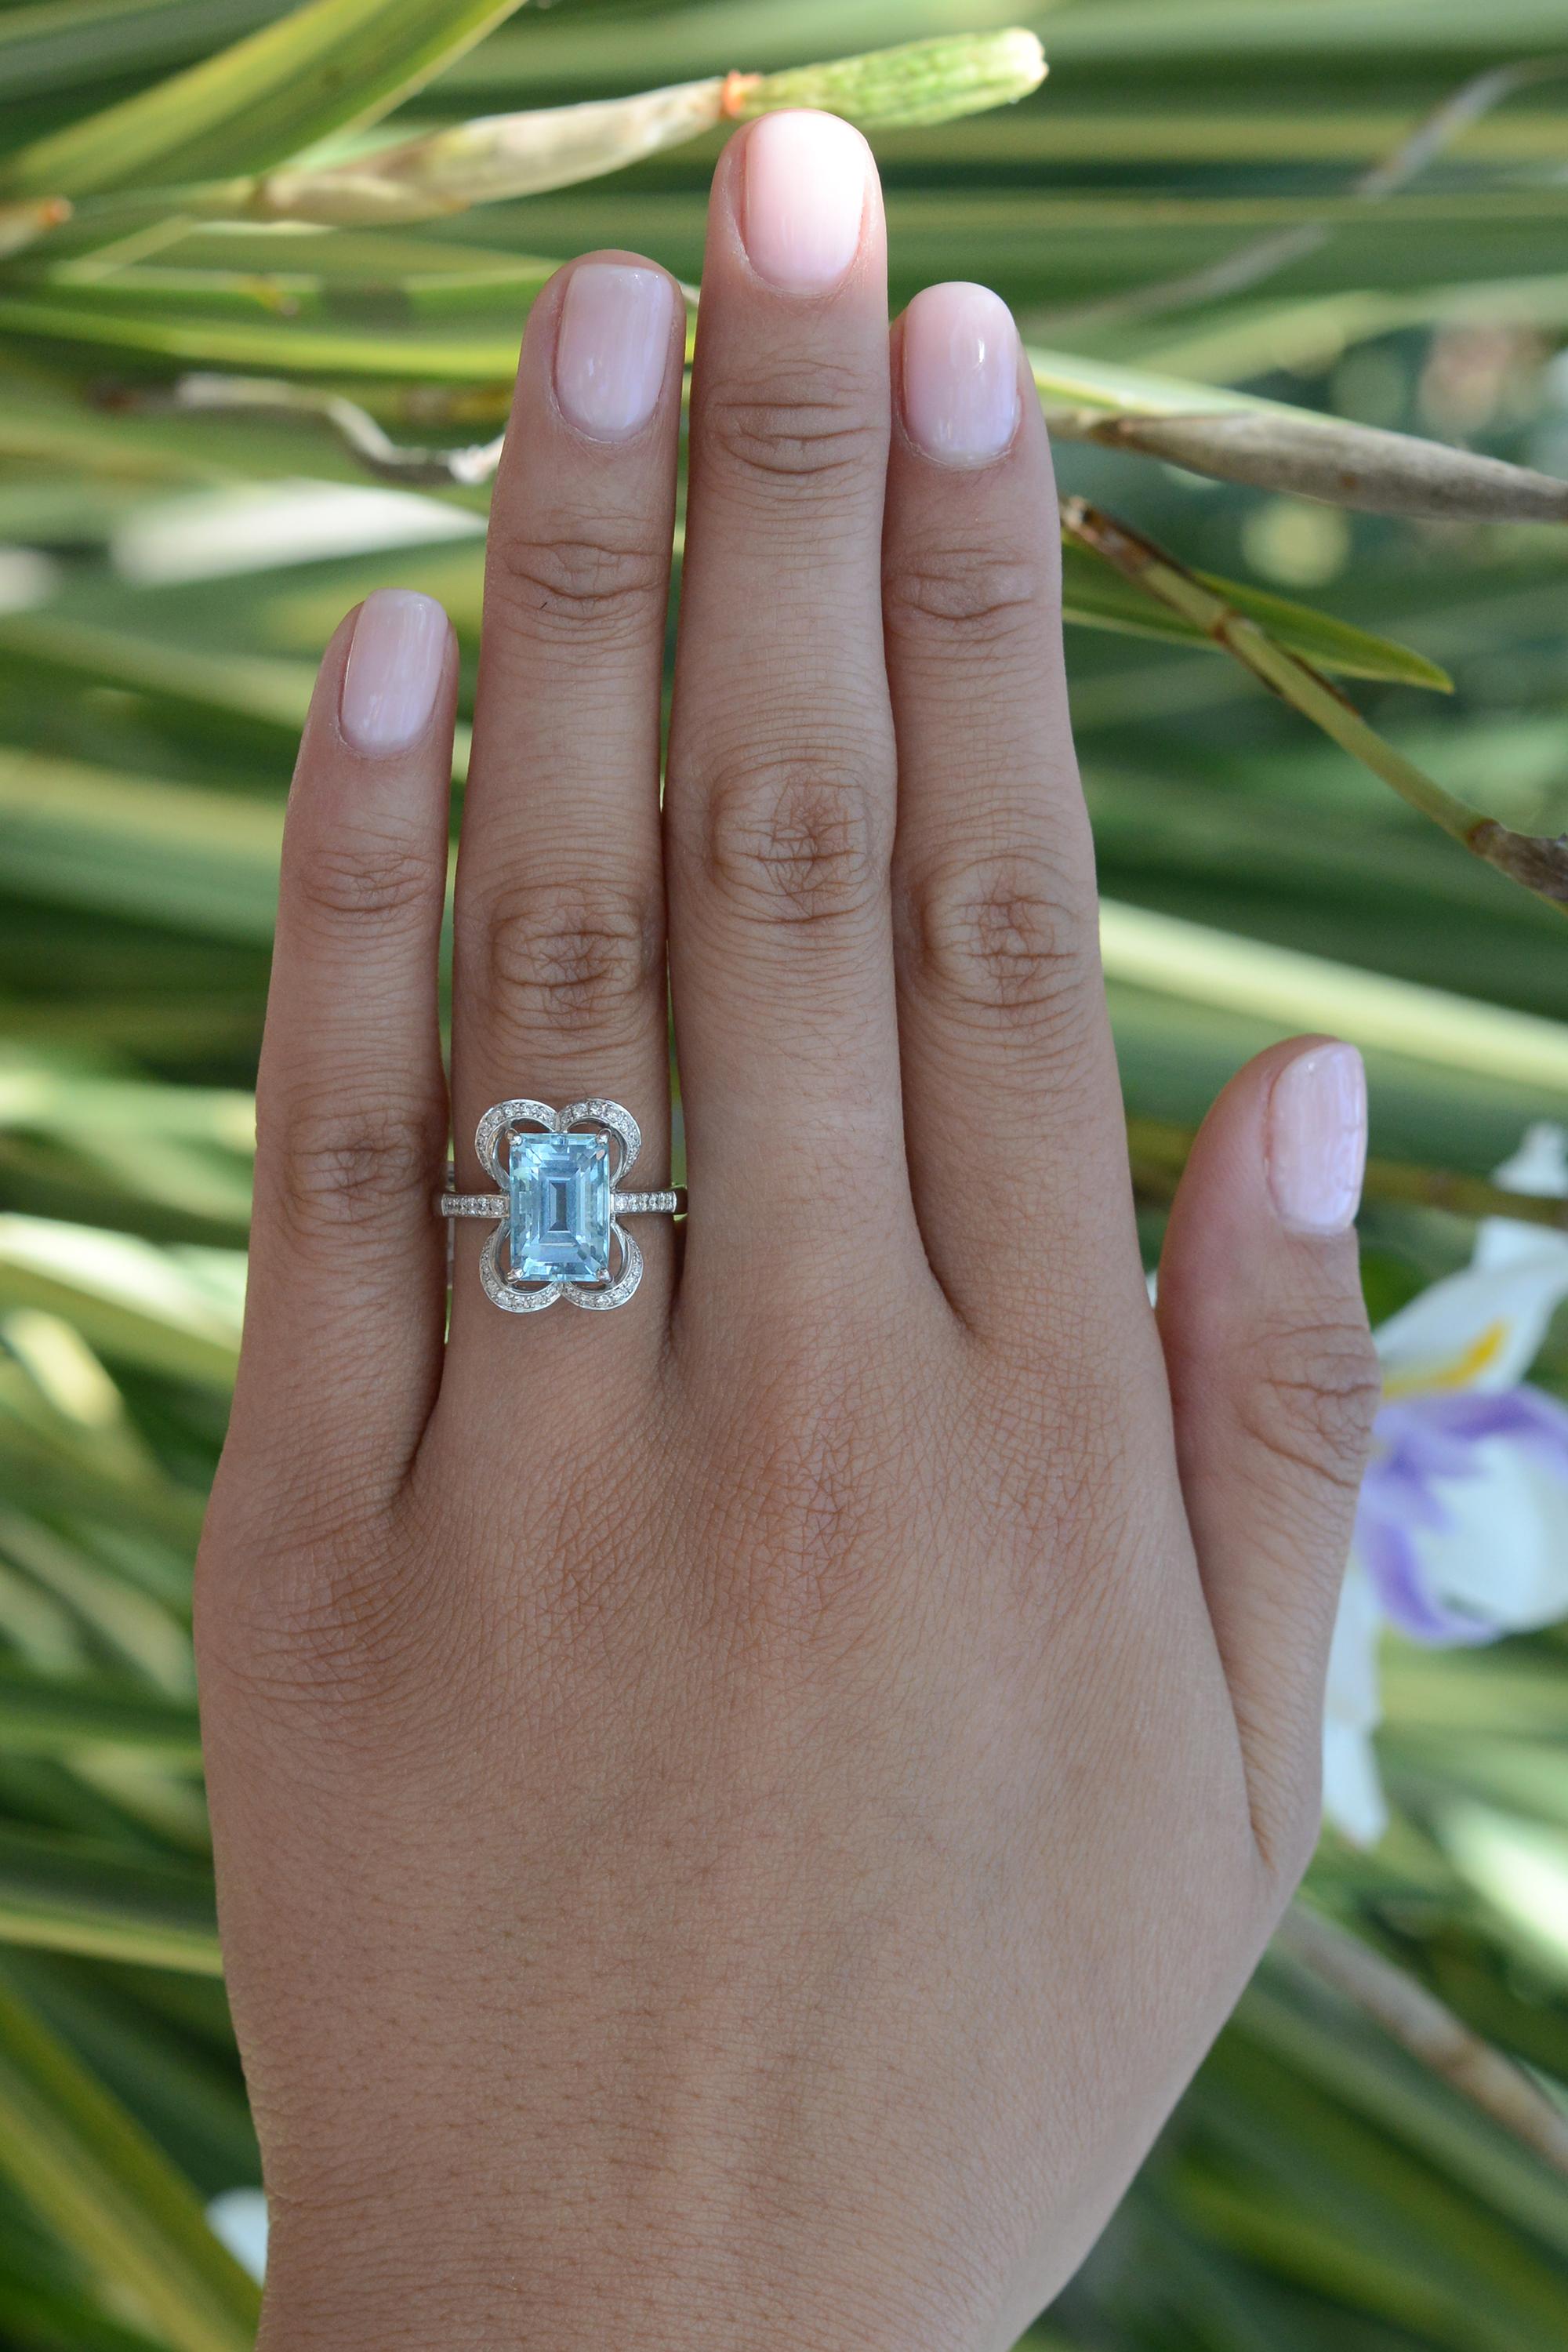 This sophisticated designer engagement ring presents a substantial 3.47 carat aquamarine gemstone, uniquely bejeweled with 44 glimmering diamonds. With a twist of contemporary fashion design, this ring harmoniously pays homage to the classic